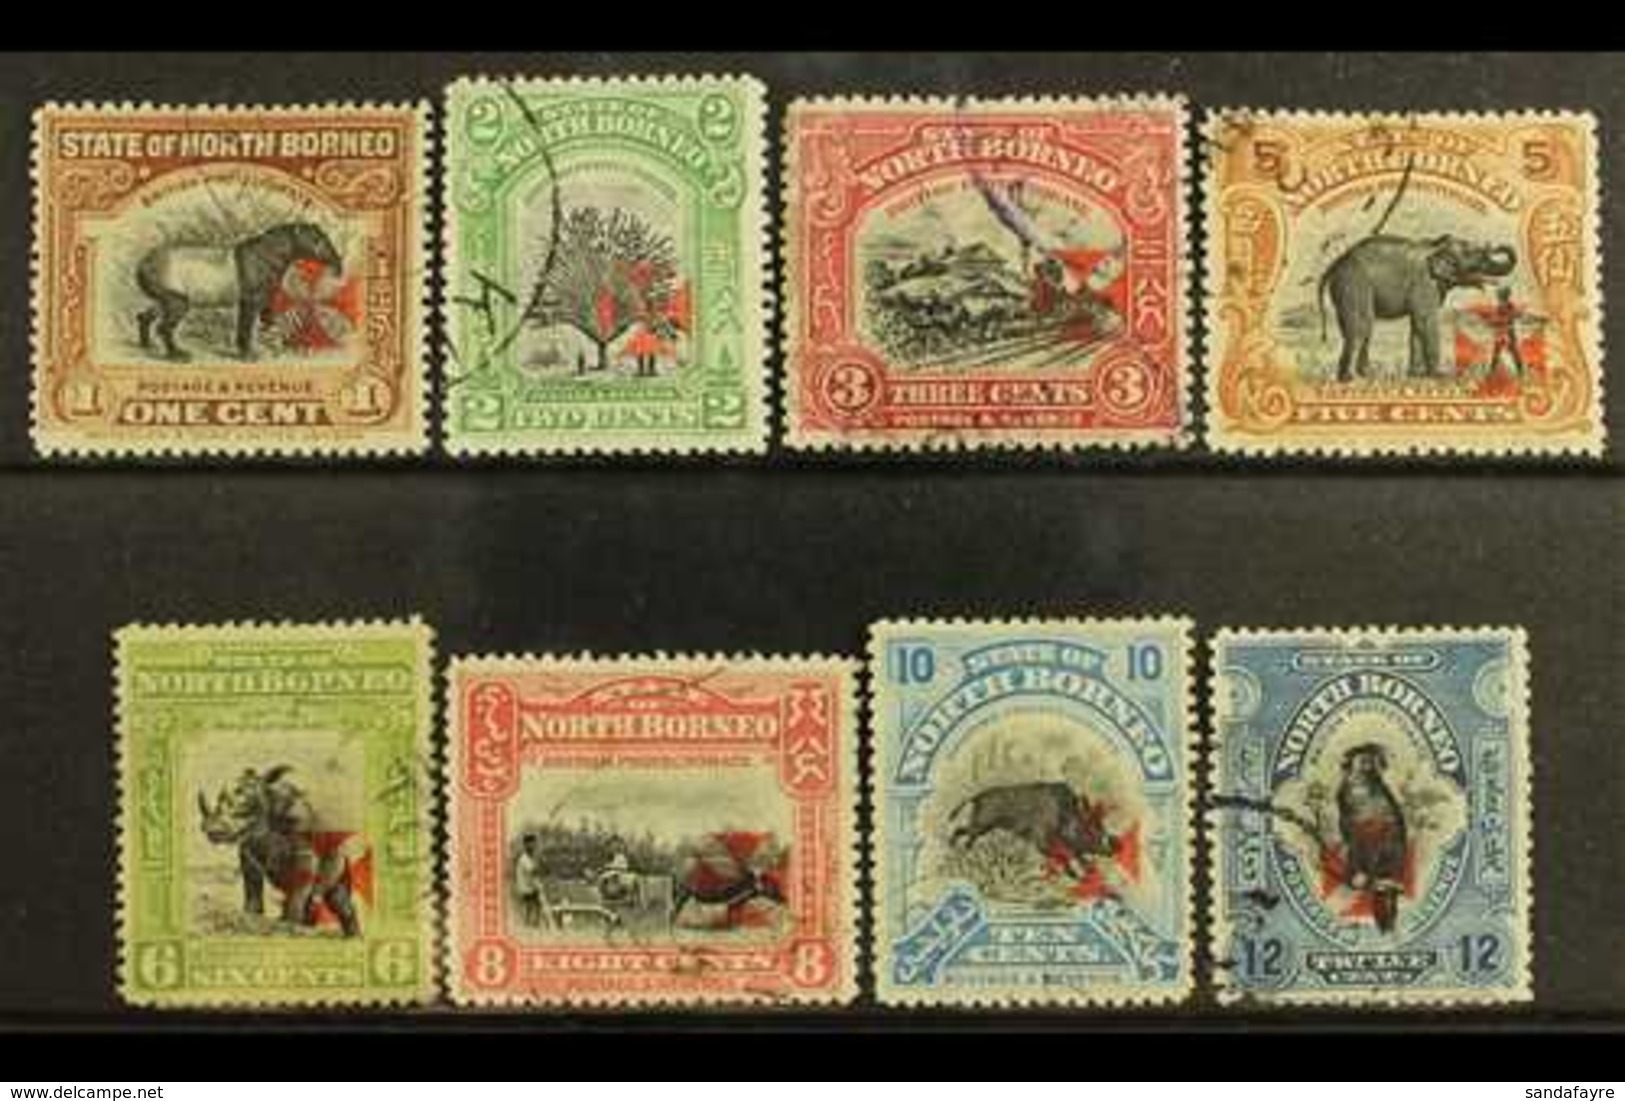 1916  Red Cross Overprints In Carmine Set To 12c (no 4c Carmine), SG 202/209 (no 204a), Very Fine Used. (8 Stamps) For M - Noord Borneo (...-1963)